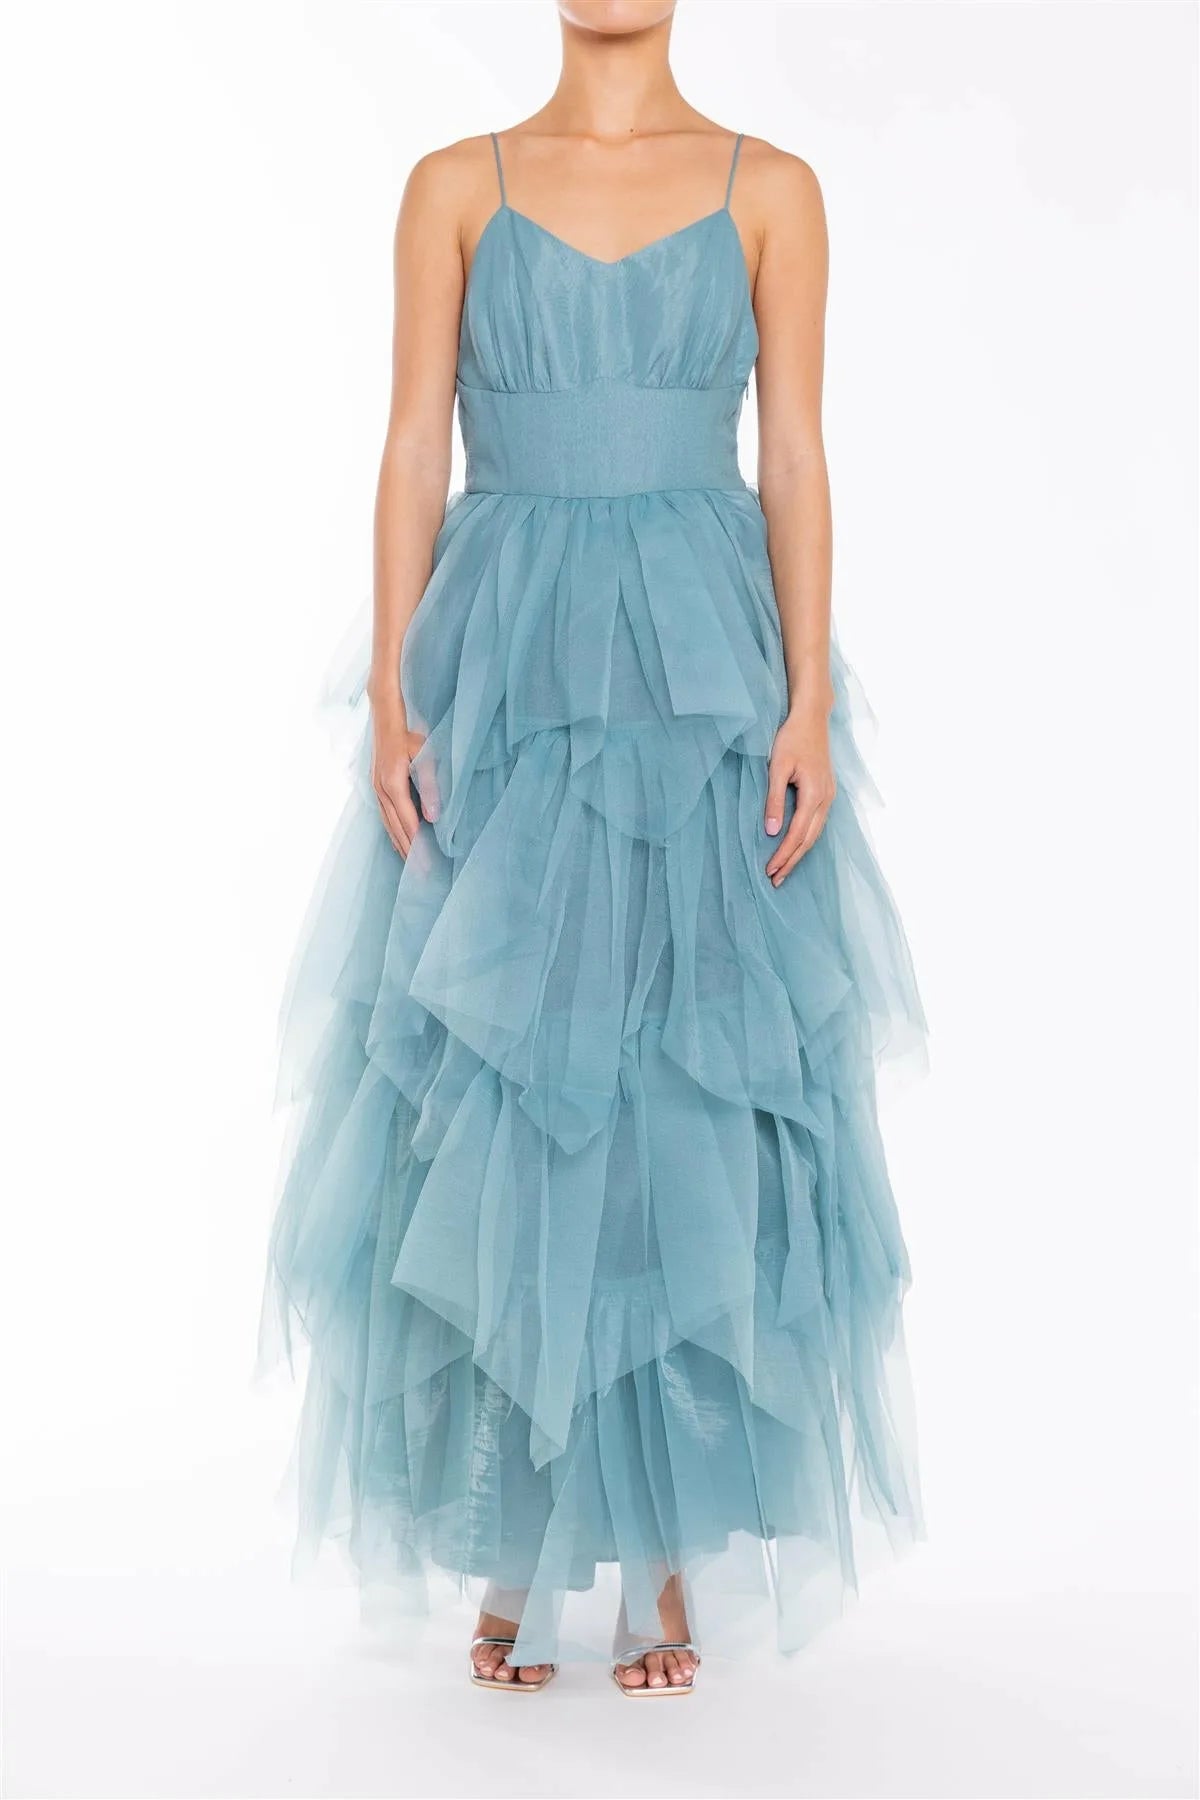 True Decadence Saige Mineral Blue V-neck Tiered Tulle Maxi Dress